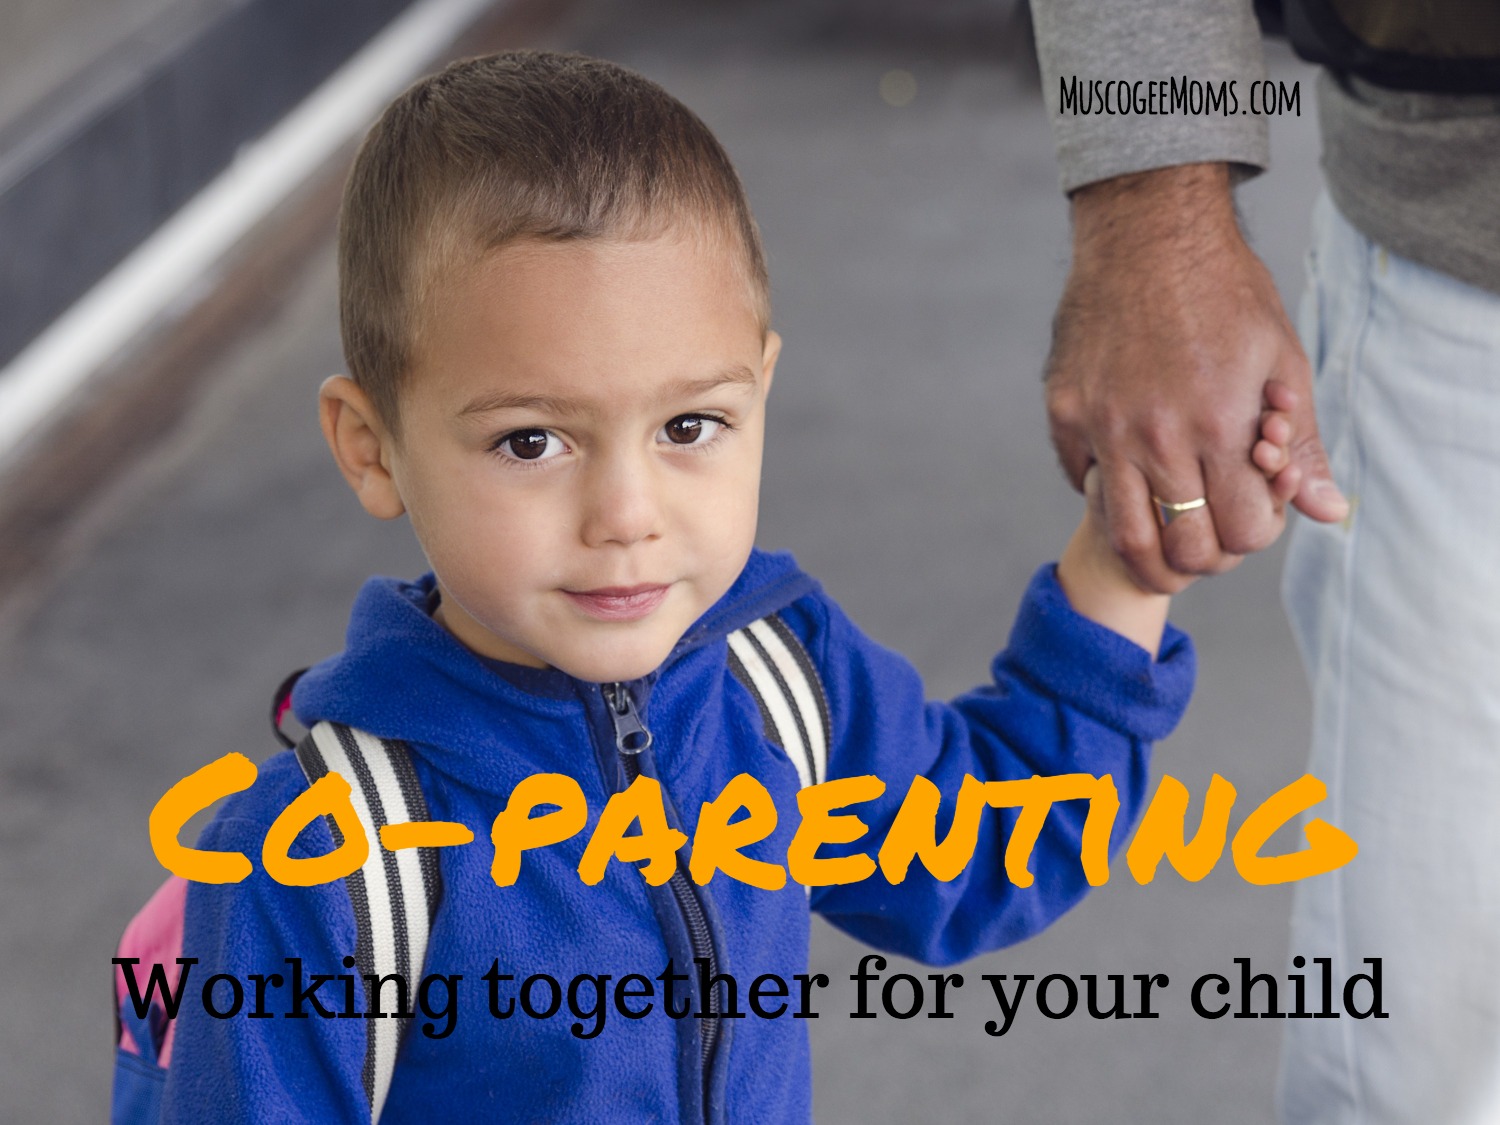 Co-parenting: Working together for your child